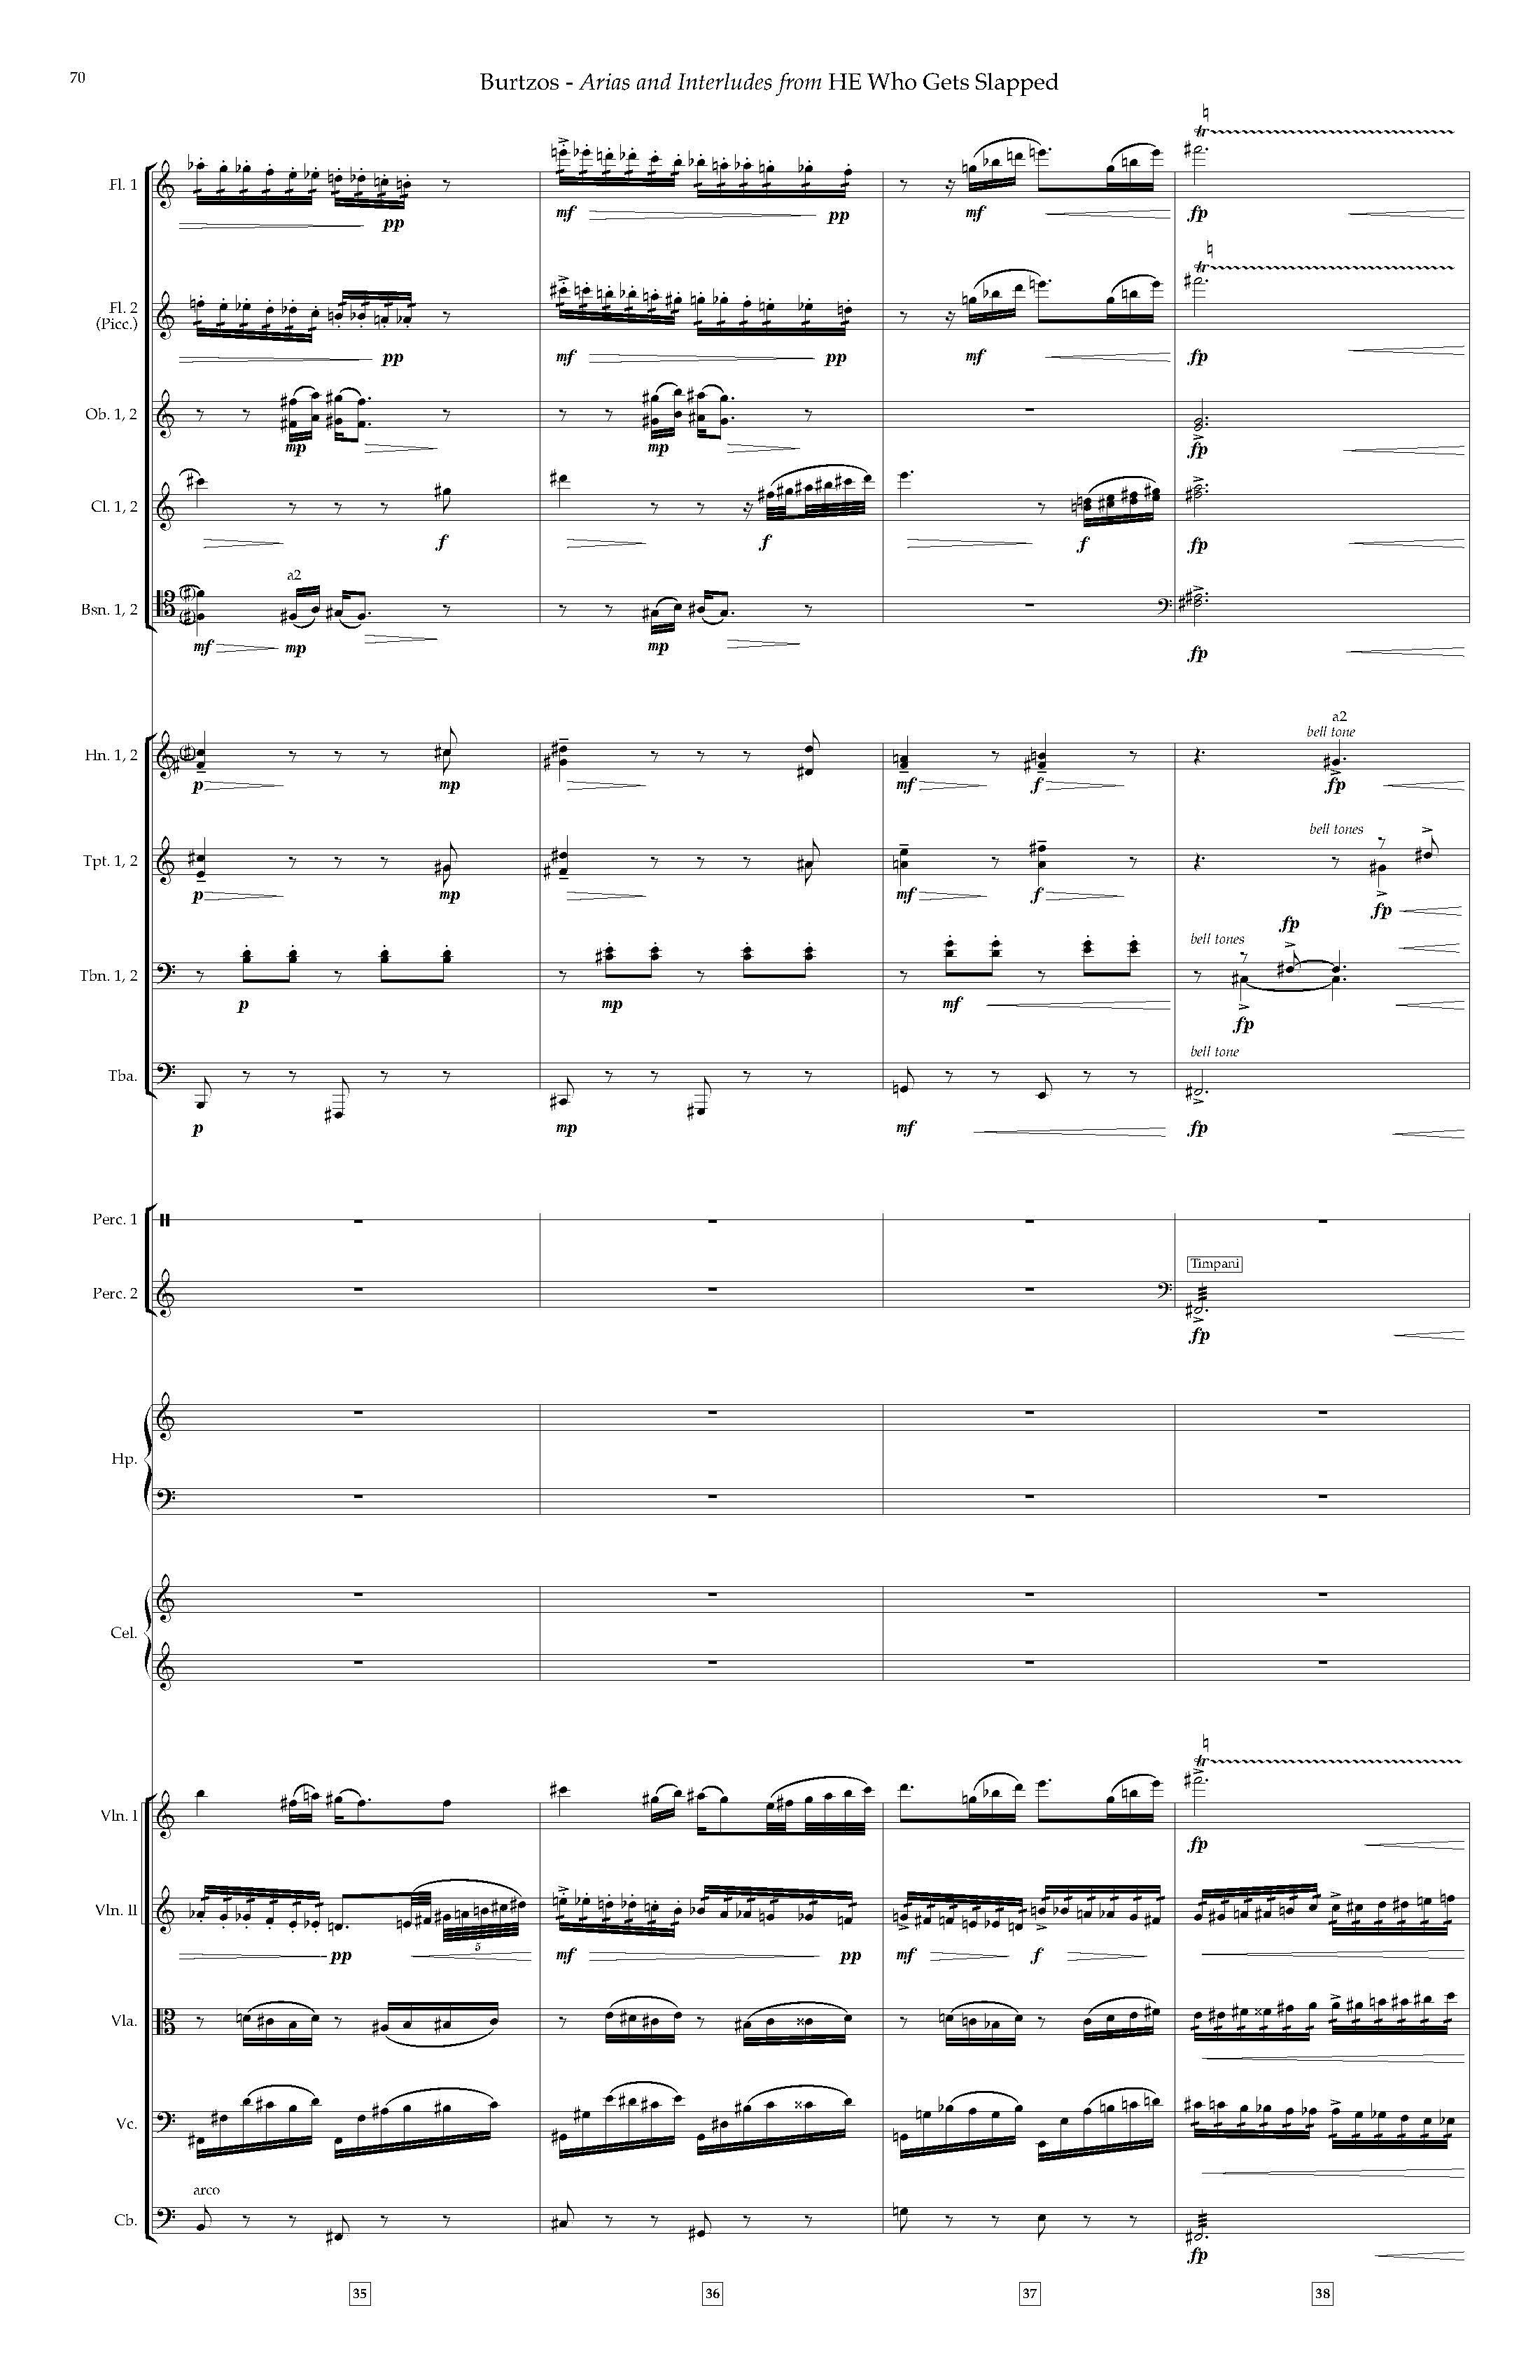 Arias and Interludes from HWGS - Complete Score_Page_76.jpg